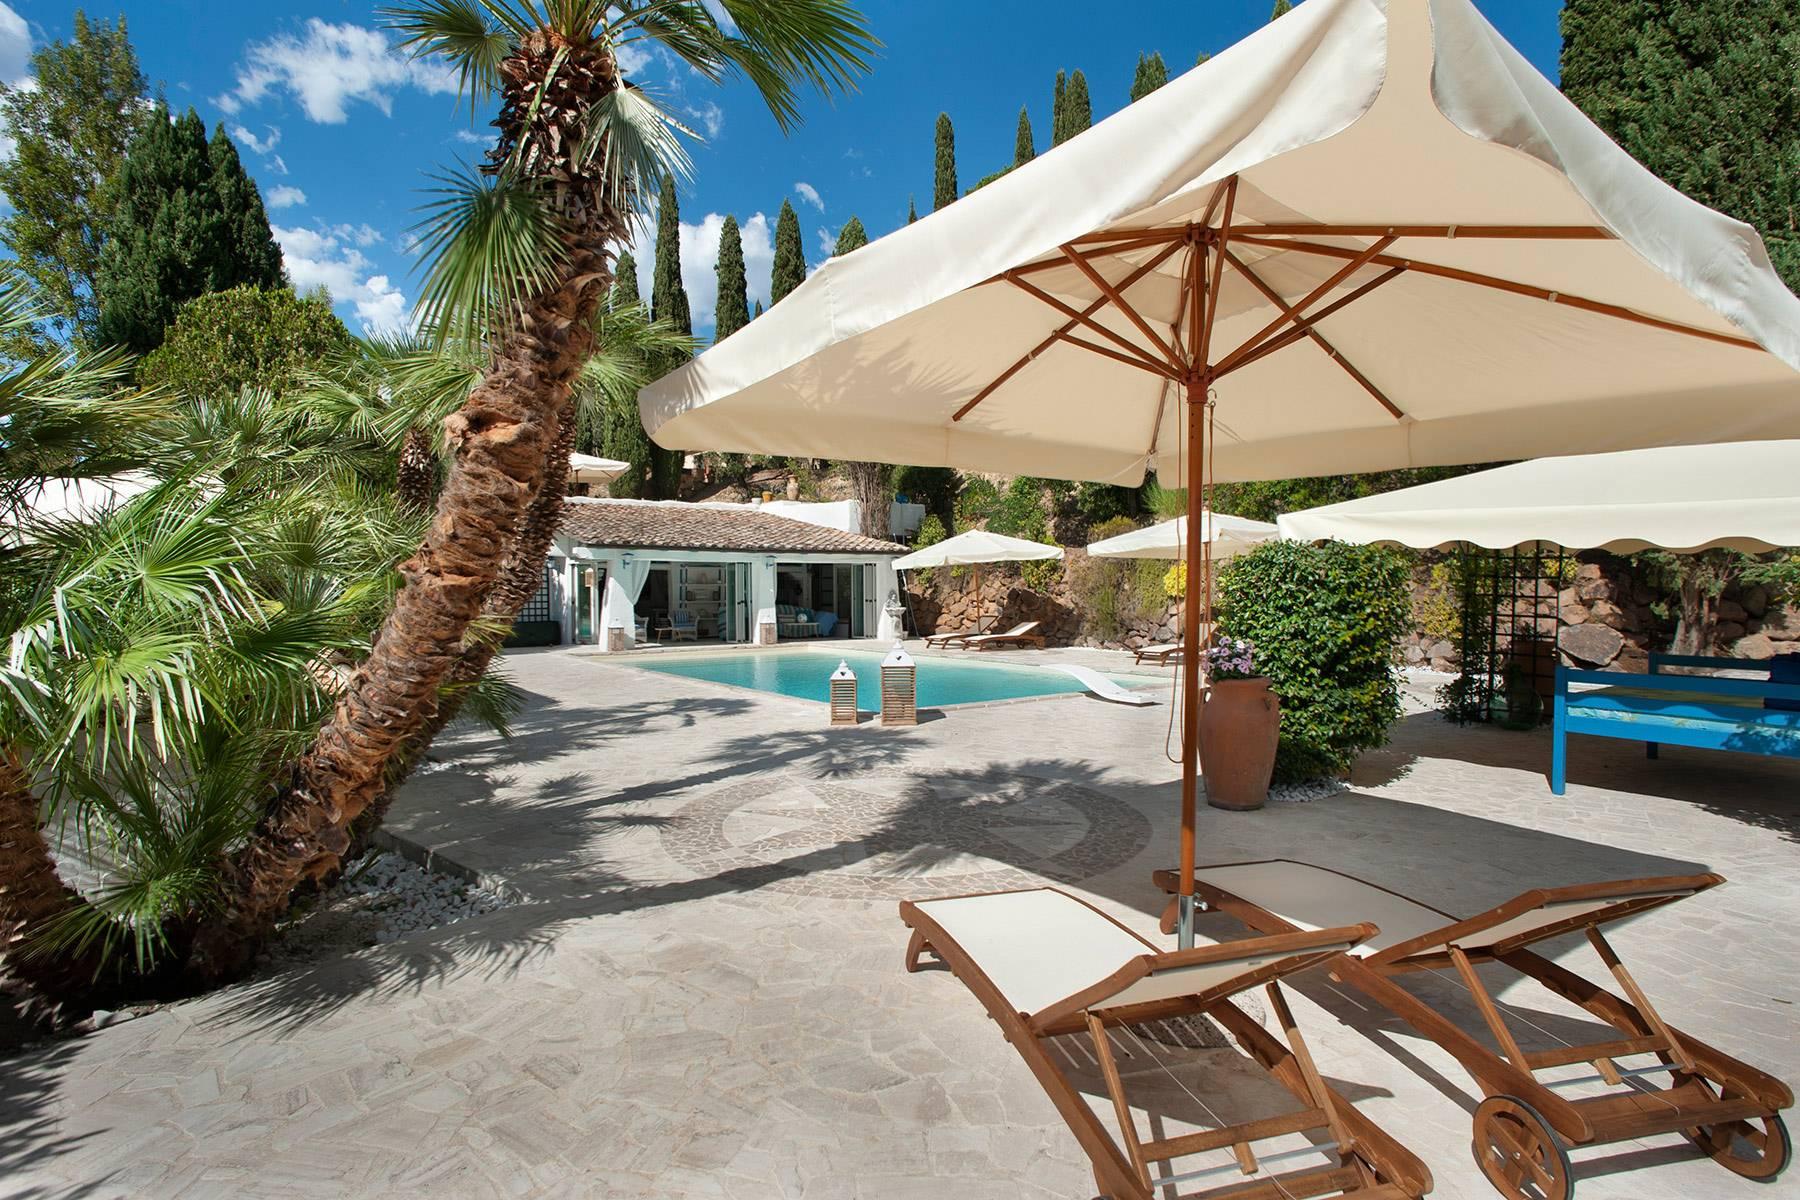 Villa Nayara - Lovely mansion with swimming pool 30 minutes from Rome - 32